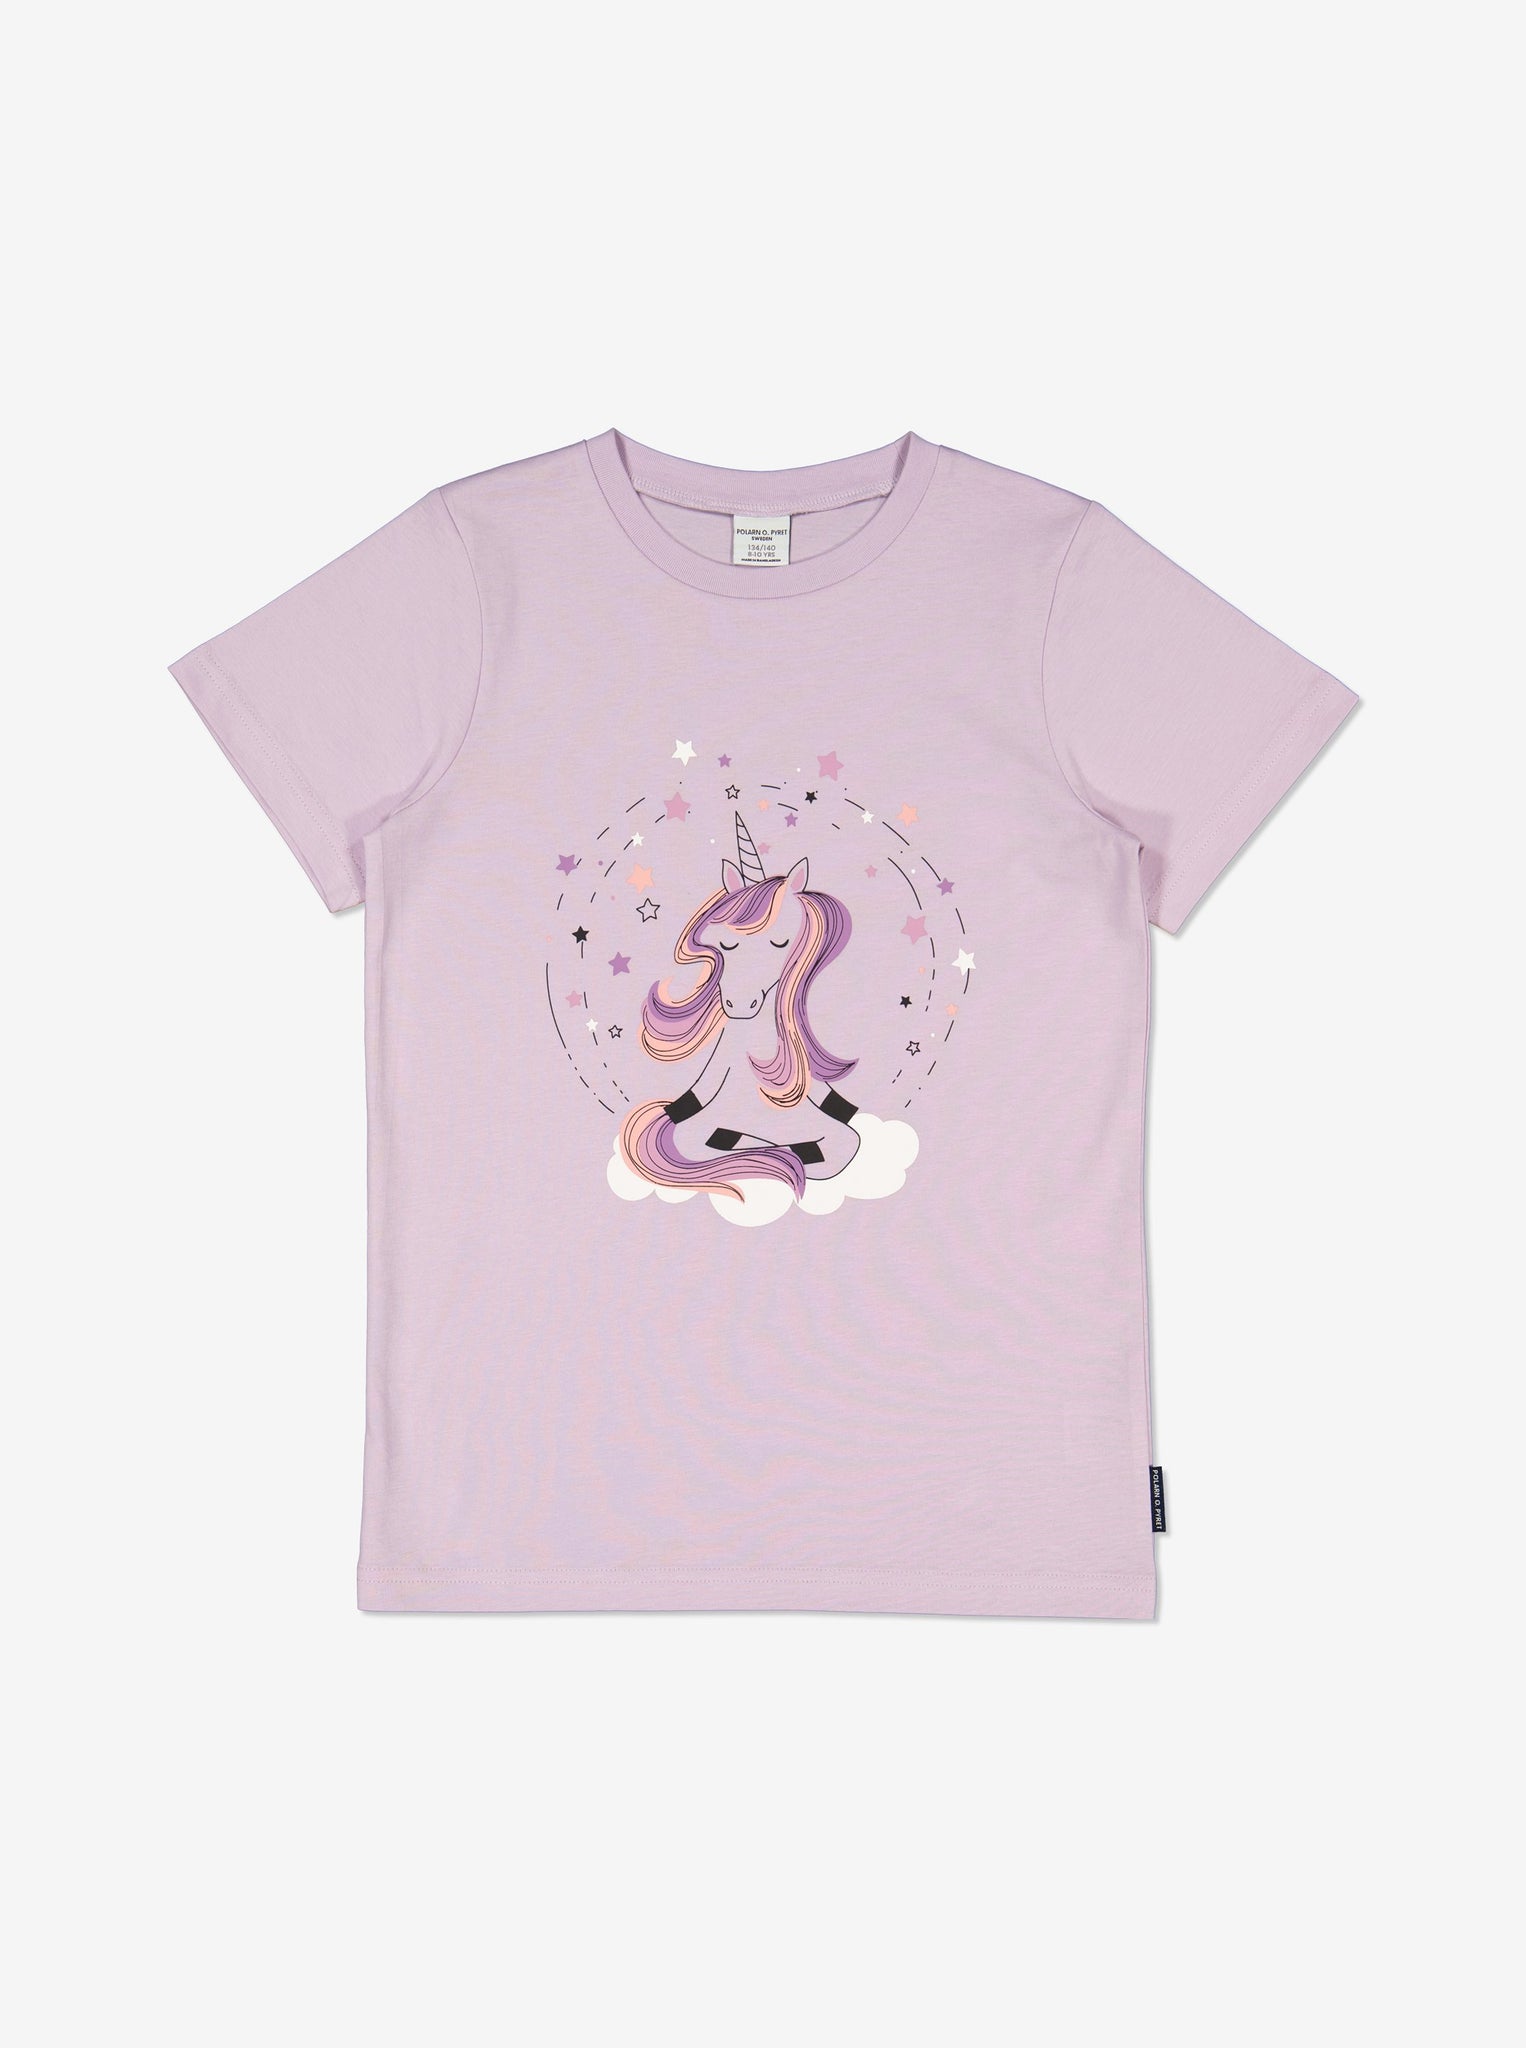  Pink Organic Kids T-Shirt from Polarn O. Pyret Kidswear. Ethical sourced material, made with 100% organic cotton.